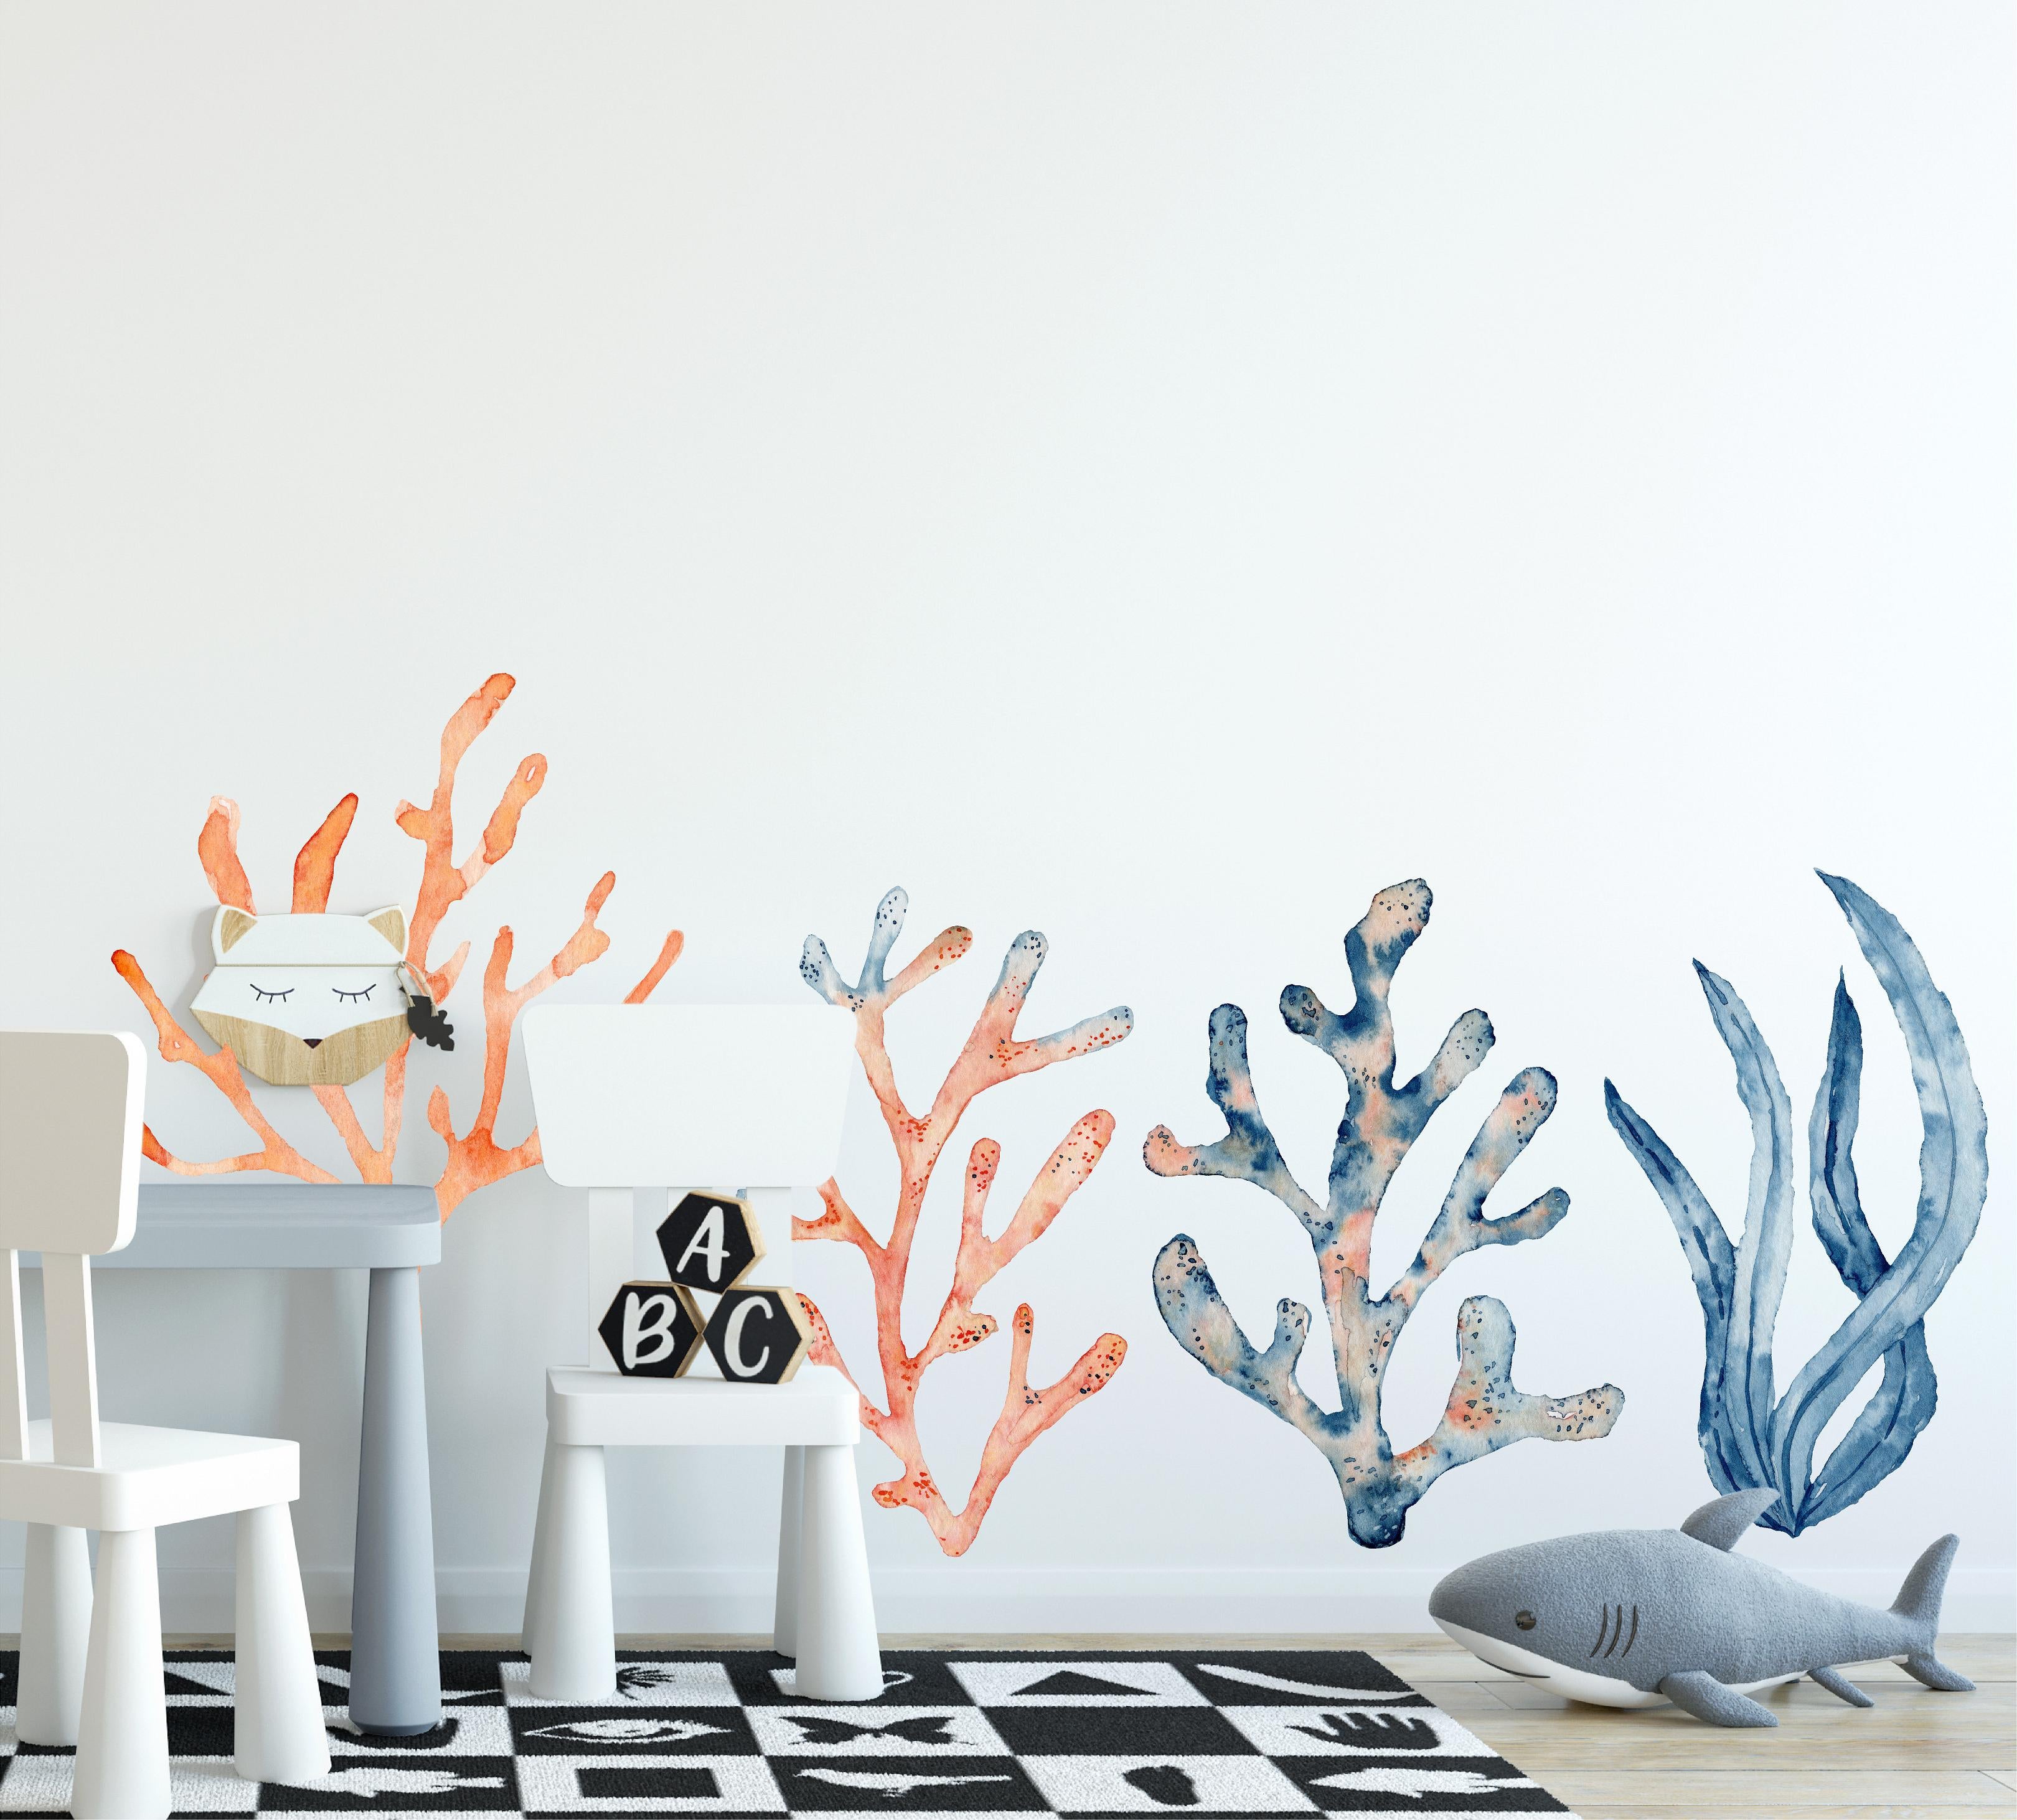 Navy Blue Orange Coral & Seaweed Wall Decal Set of 4 Ocean Sea Life Removable Fabric Wall Sticker | DecalBaby